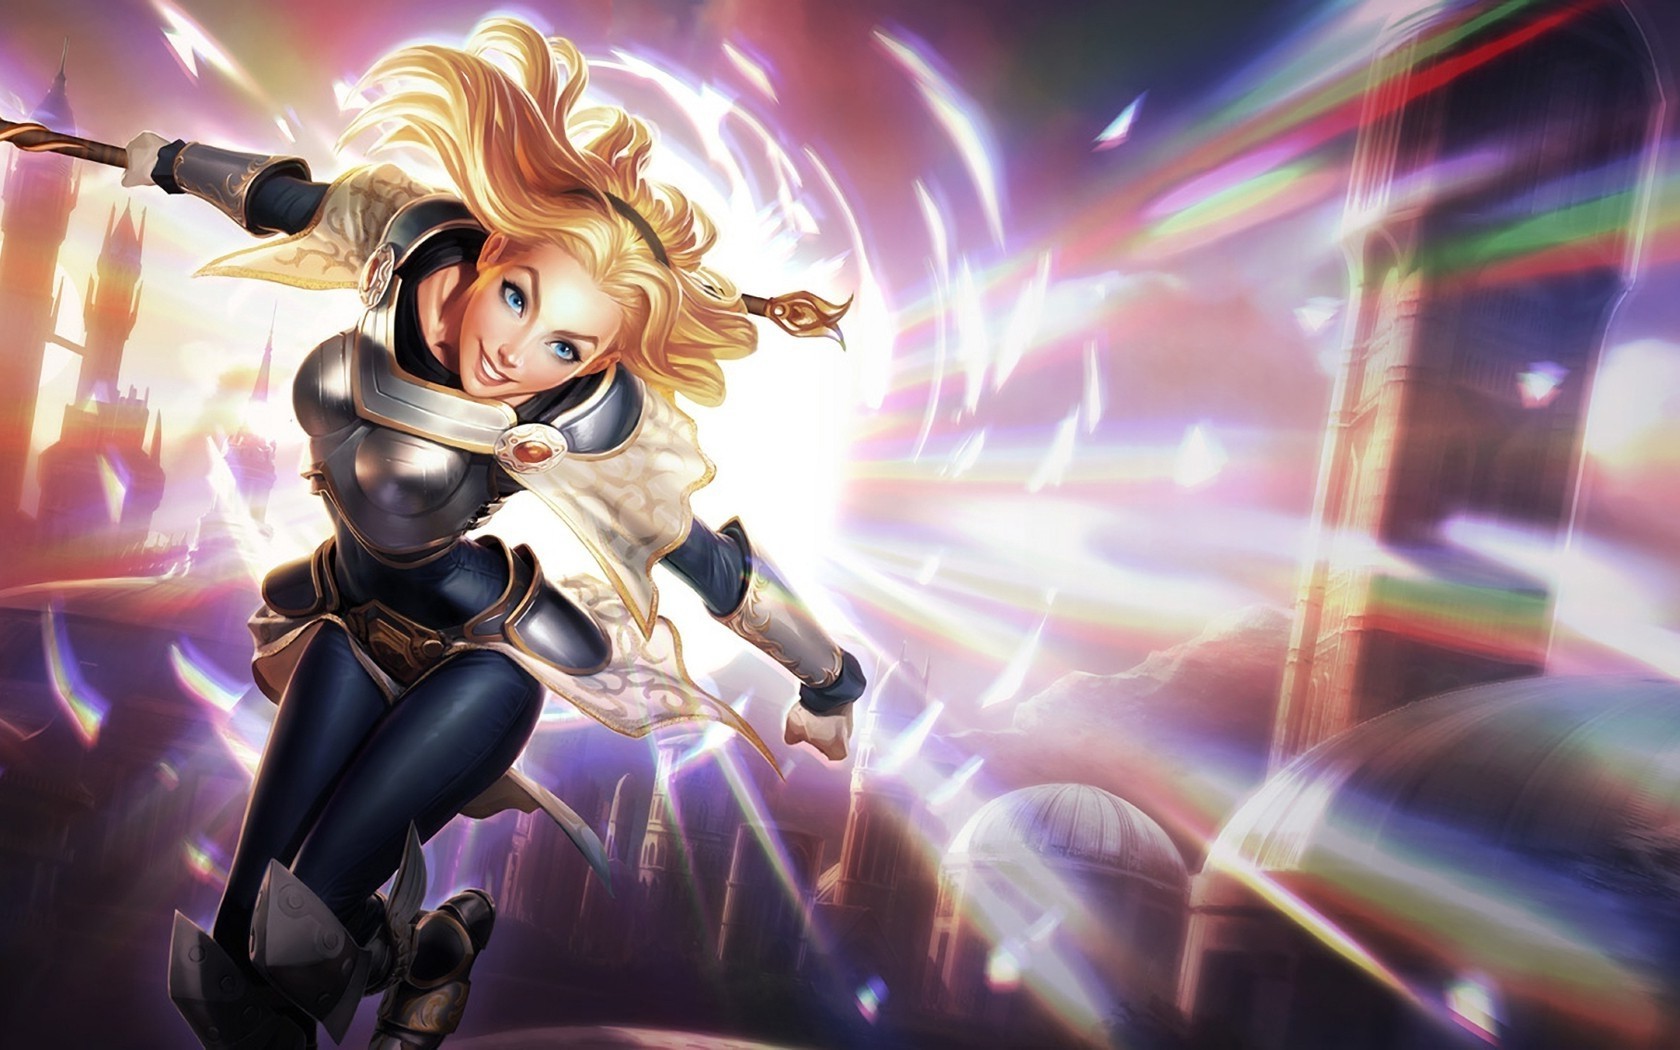 lux wallpaper,cg artwork,anime,fictional character,illustration,graphic design